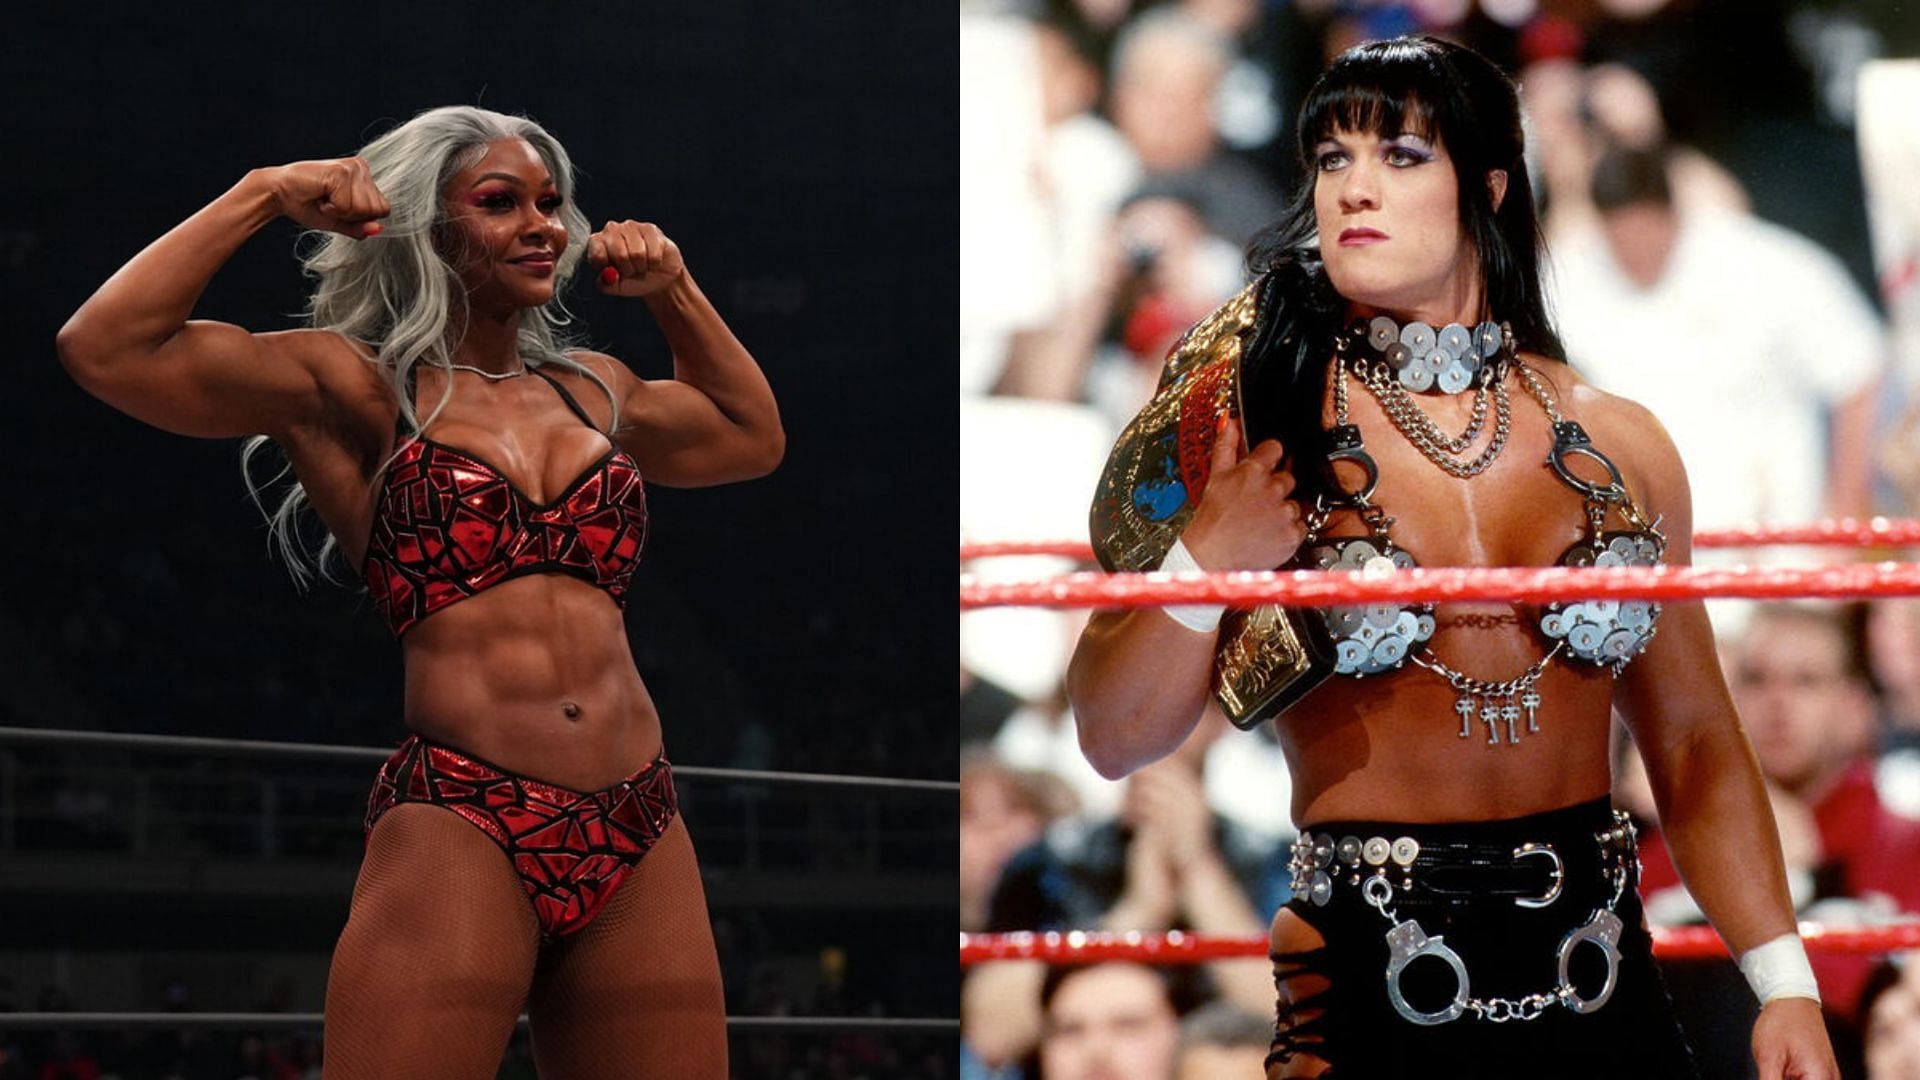 Jade Cargill paid homage to the late, great Chyna